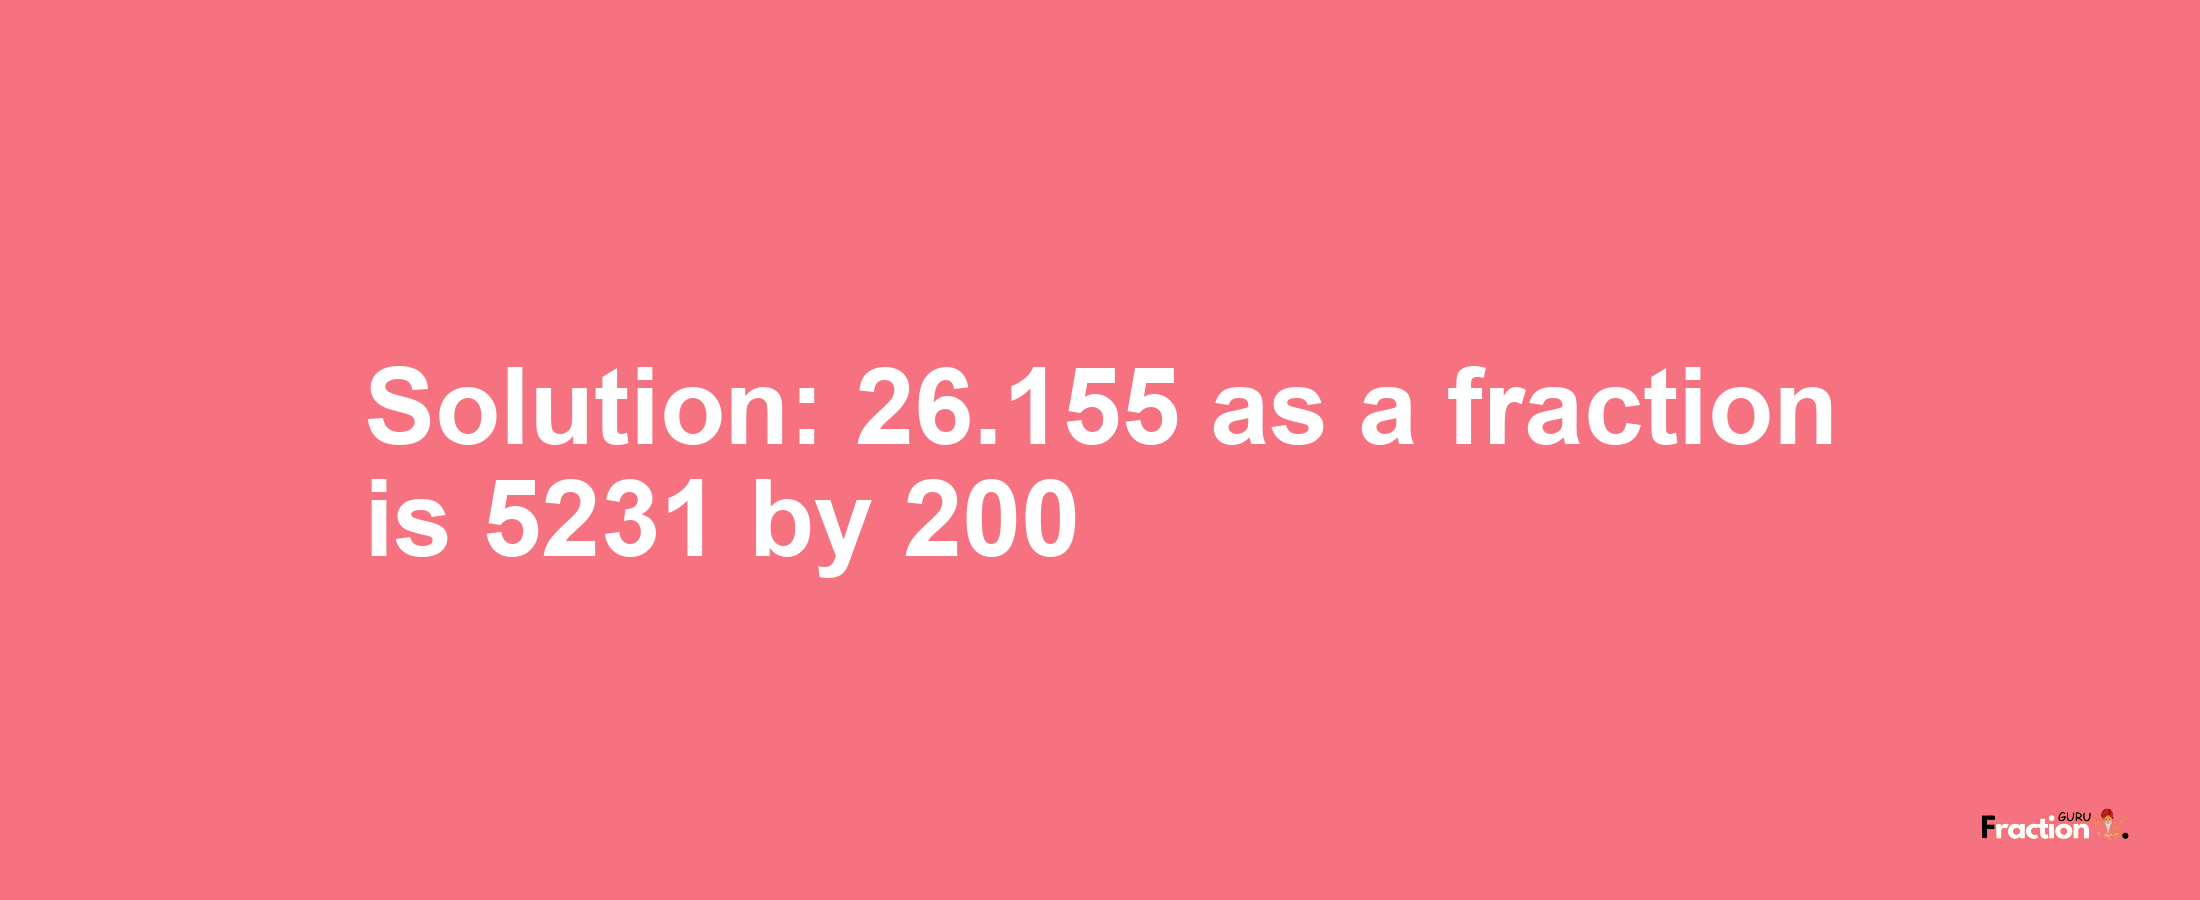 Solution:26.155 as a fraction is 5231/200